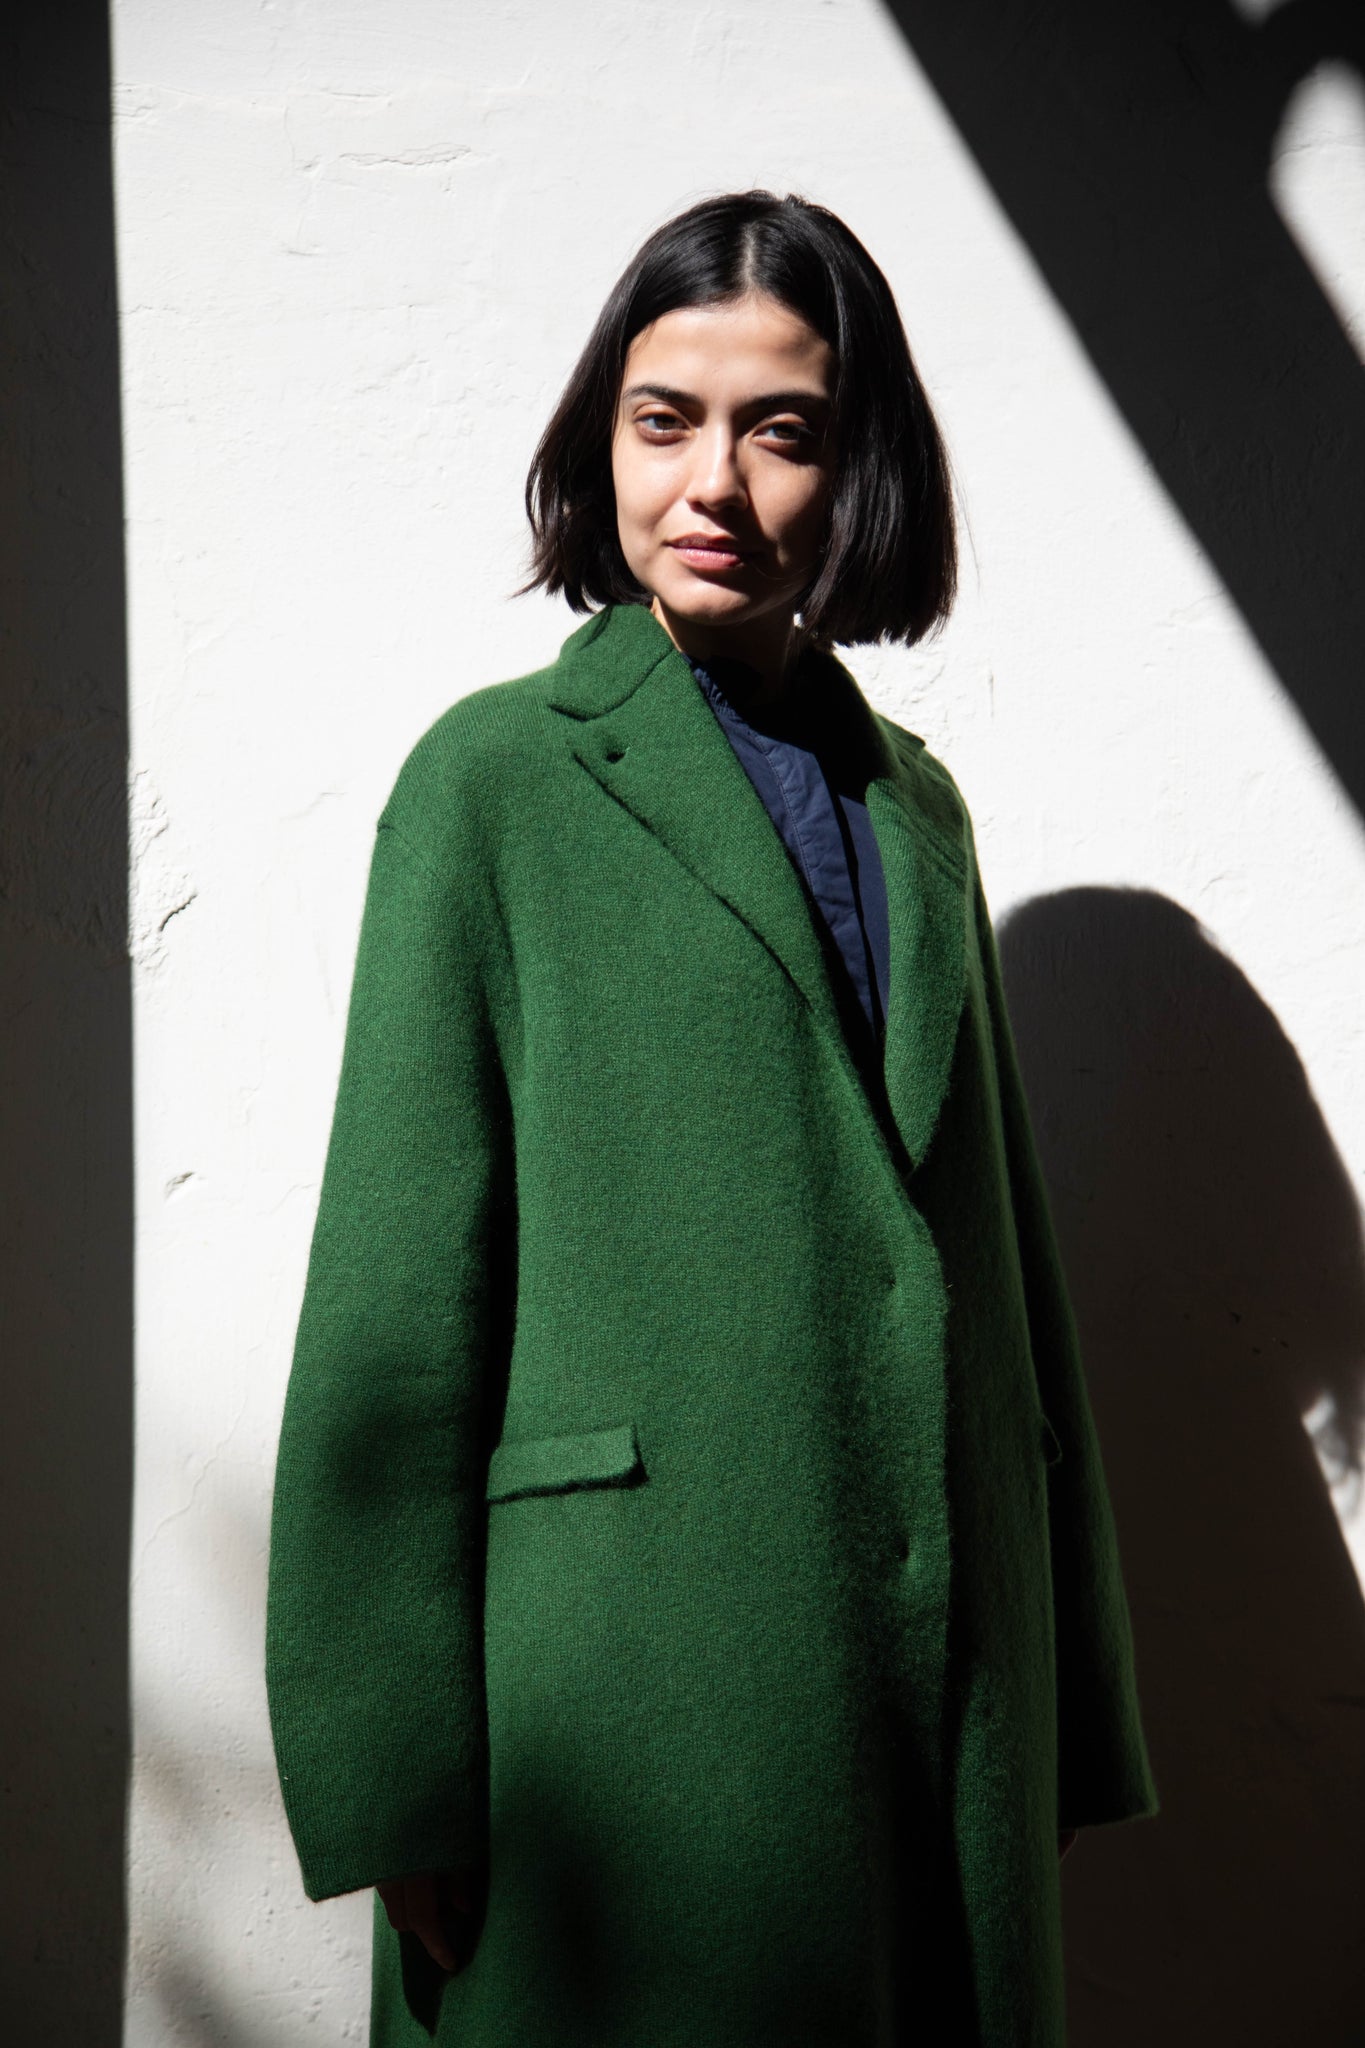 Boboutic | Double Passion Long Coat in Green